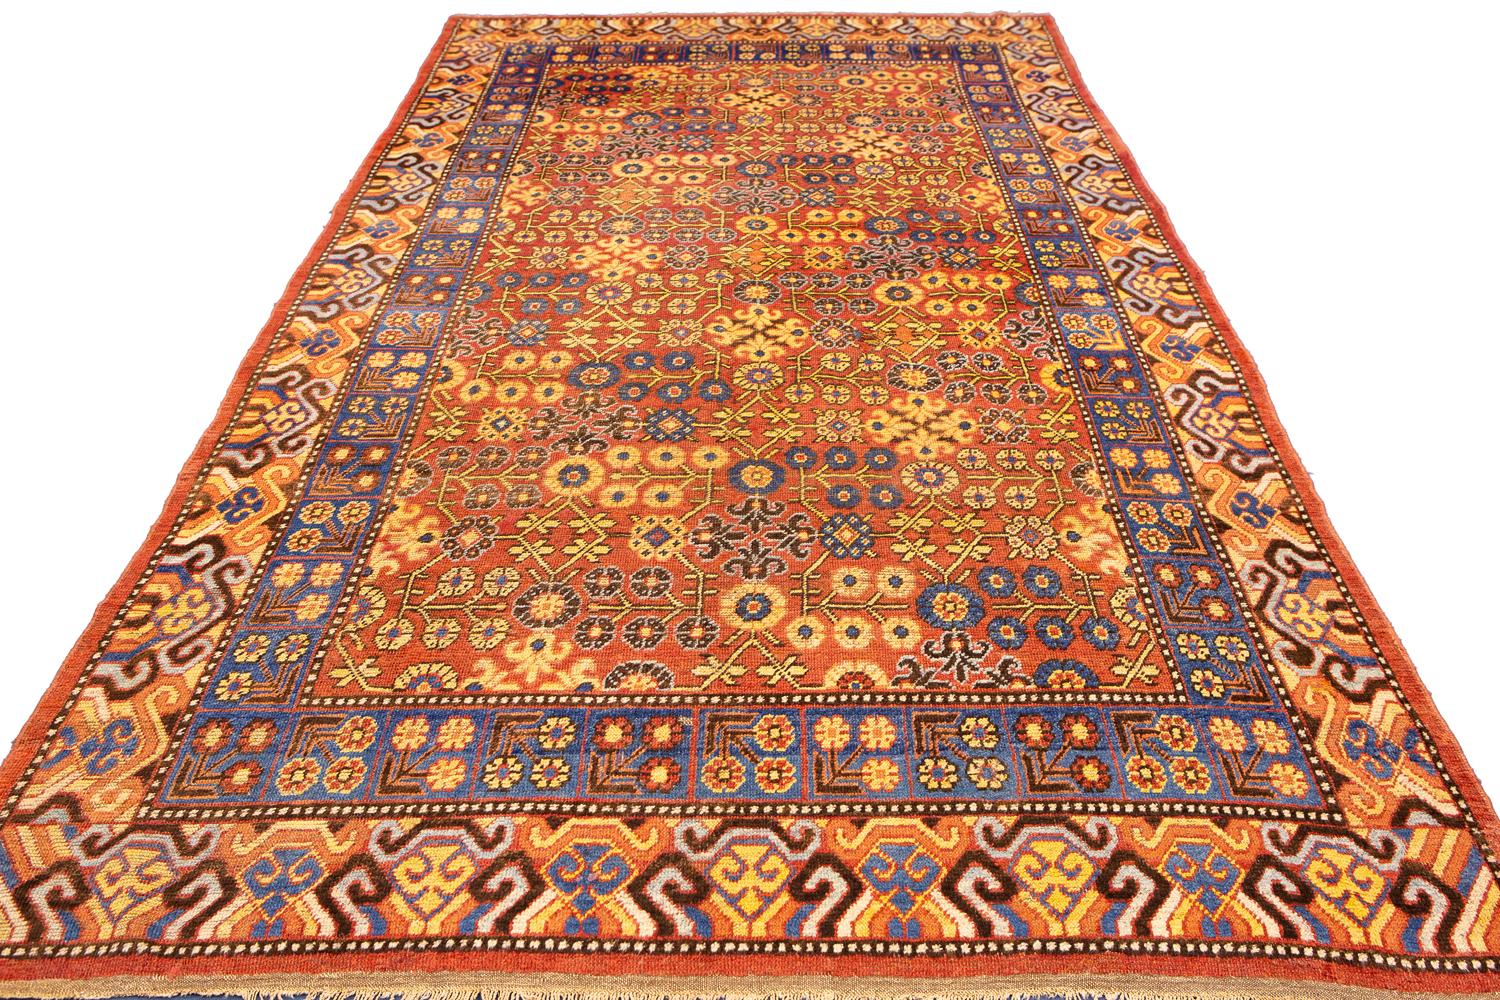 This antique Khotan rug is a beautiful piece that would add an air of elegance to any room. The colors are bold and eye-catching, and the rug is made from high-quality materials. It would be perfect for a home with a traditional style or for anyone